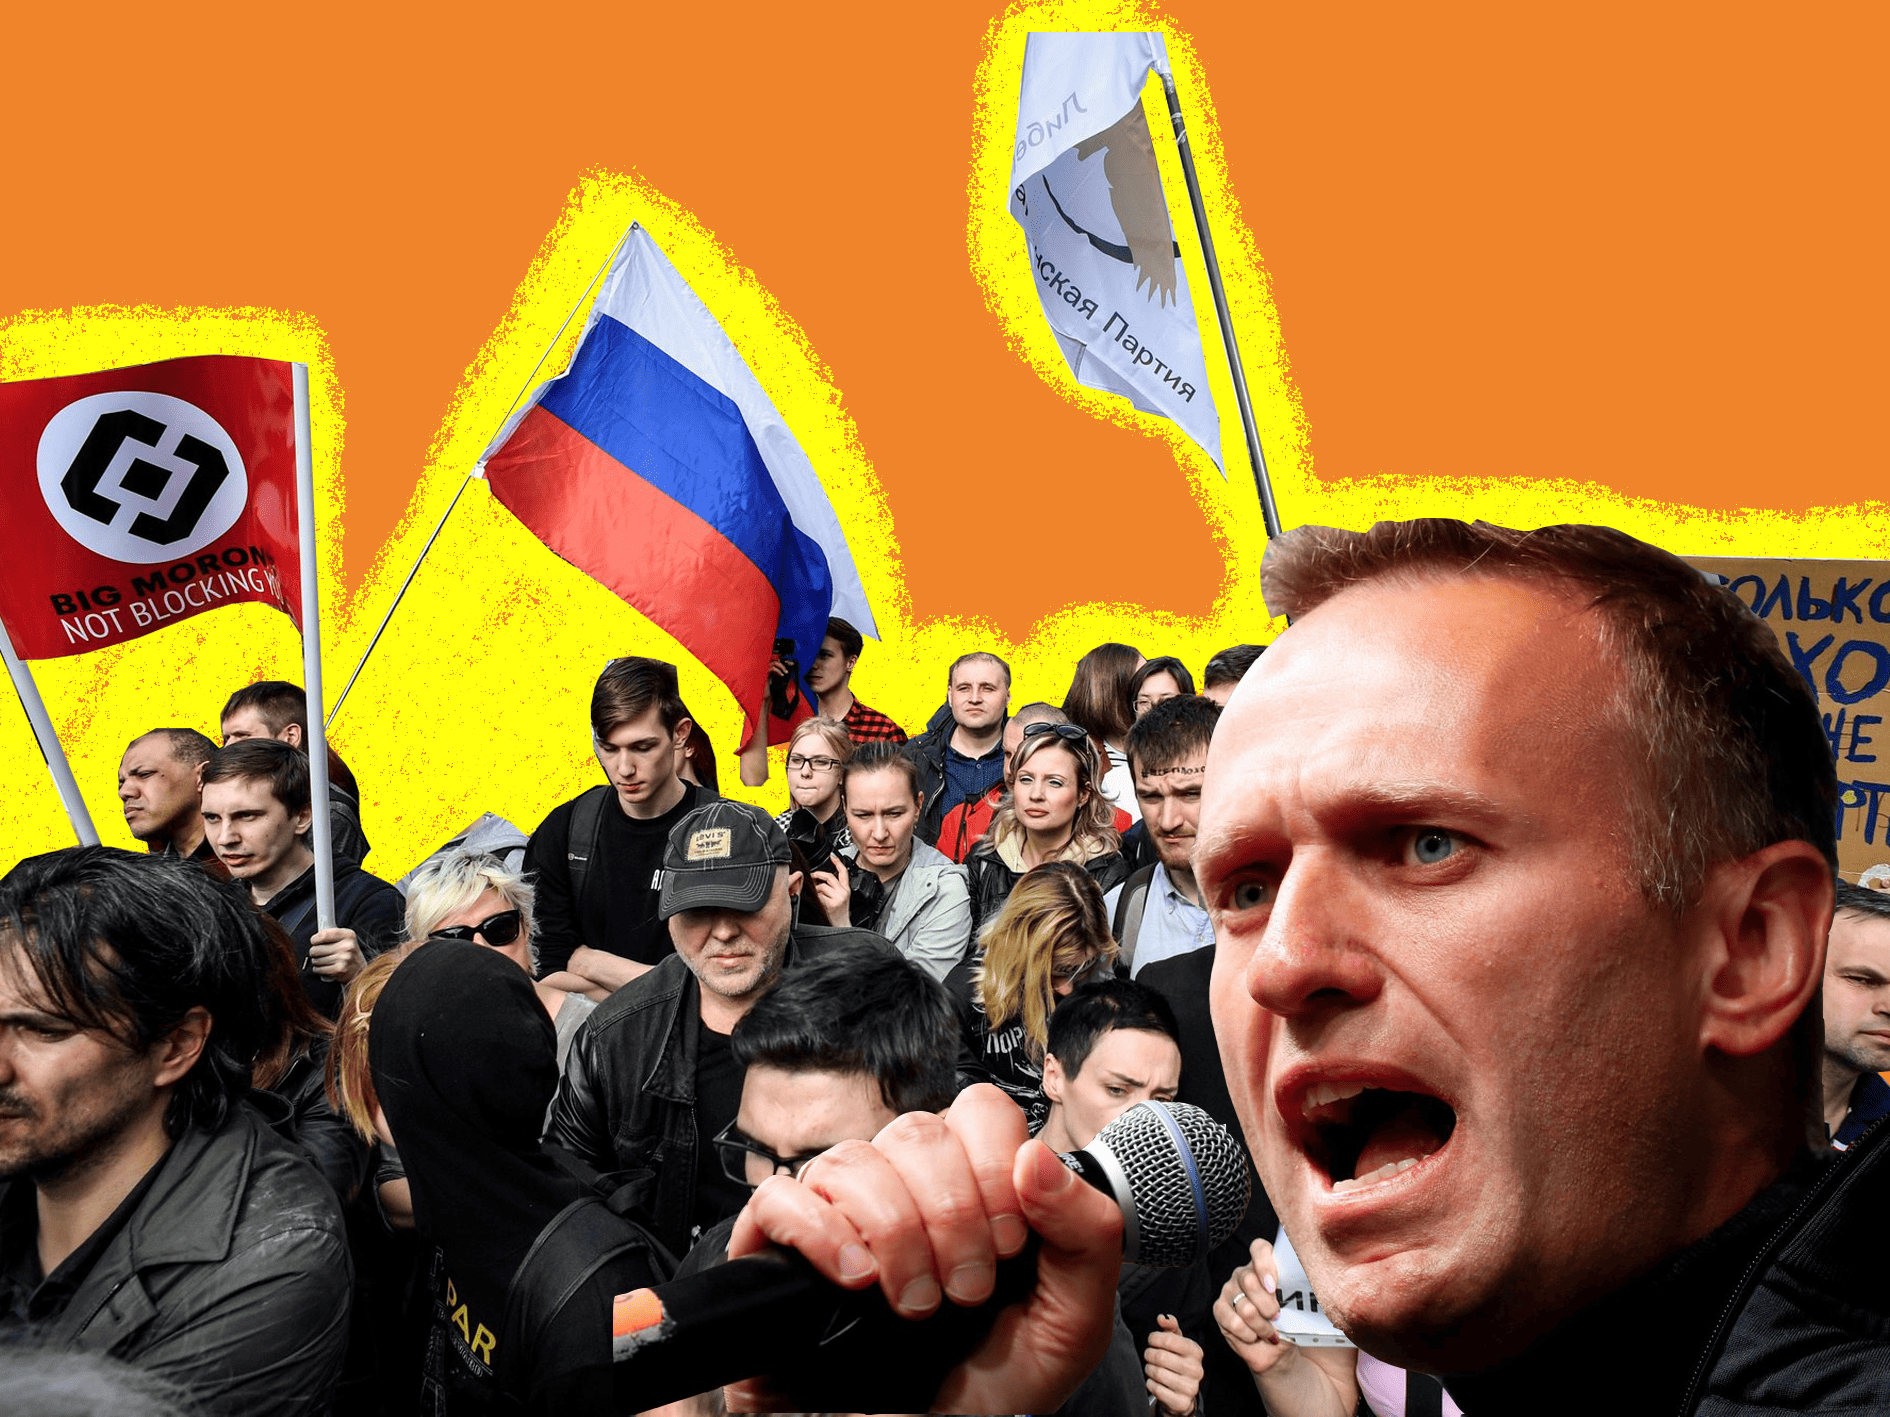 Aleksei Navalny and the Russian Student Media Shutdown – An important reminder that free speech is still not a worldwide reality